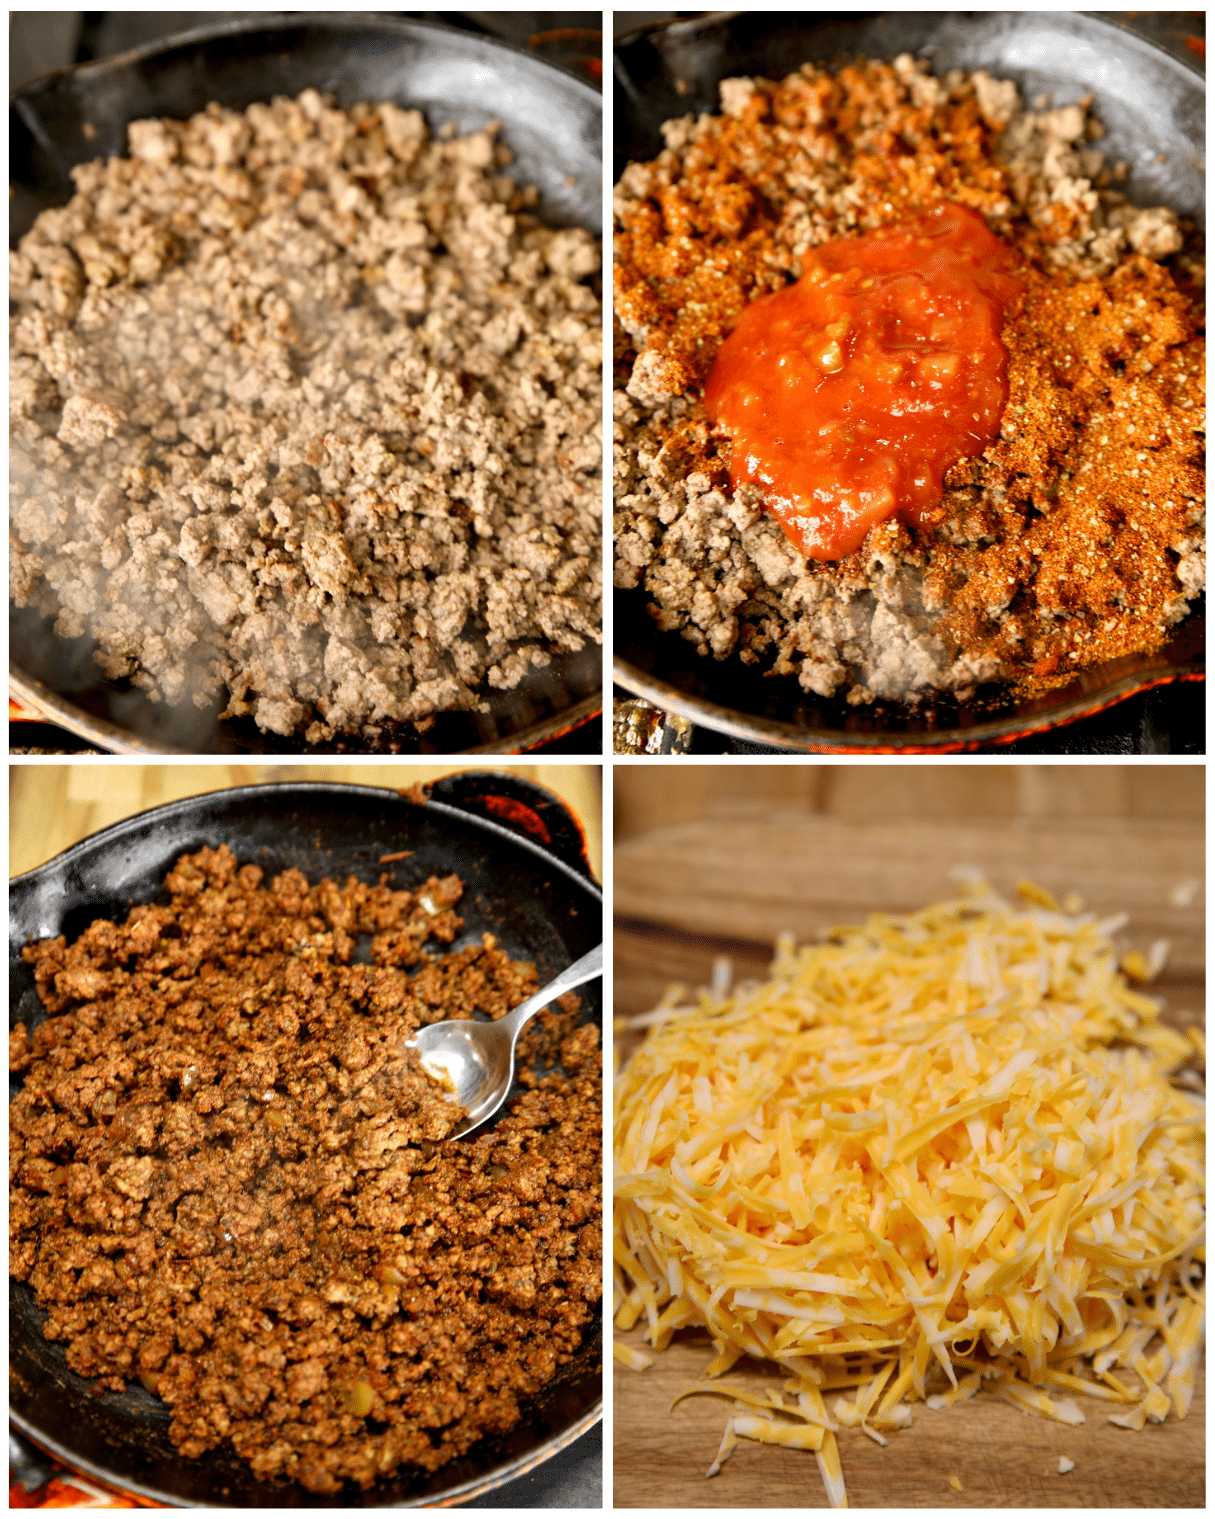 Collage making taco meat with ground beef, seasoning, picante sauce, shredded cheese.